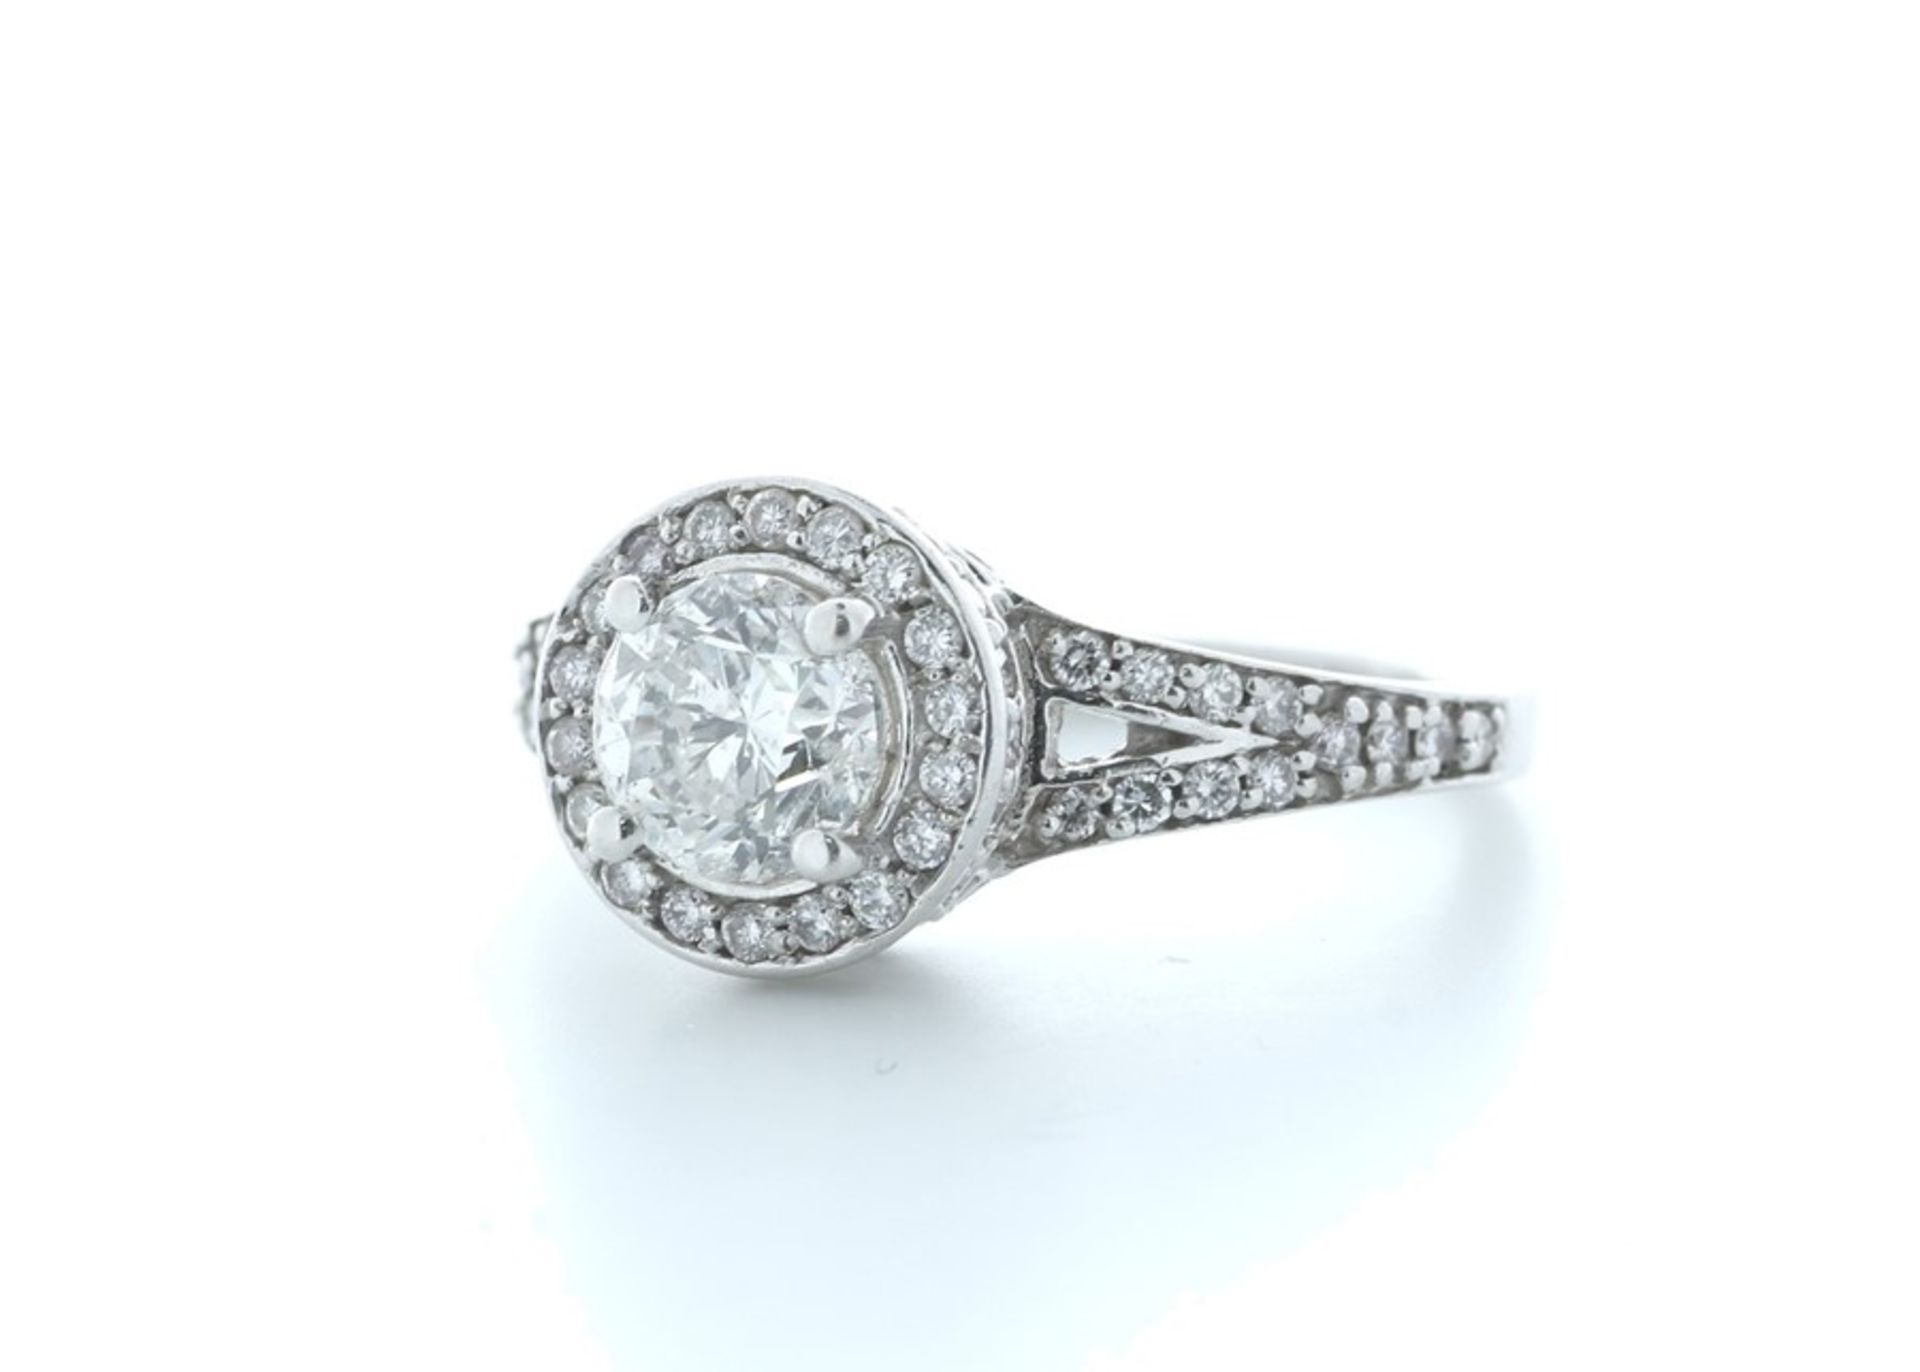 18ct White Gold Single Stone With Halo Setting Ring Valued by IDI £16,000.00 - Image 2 of 5